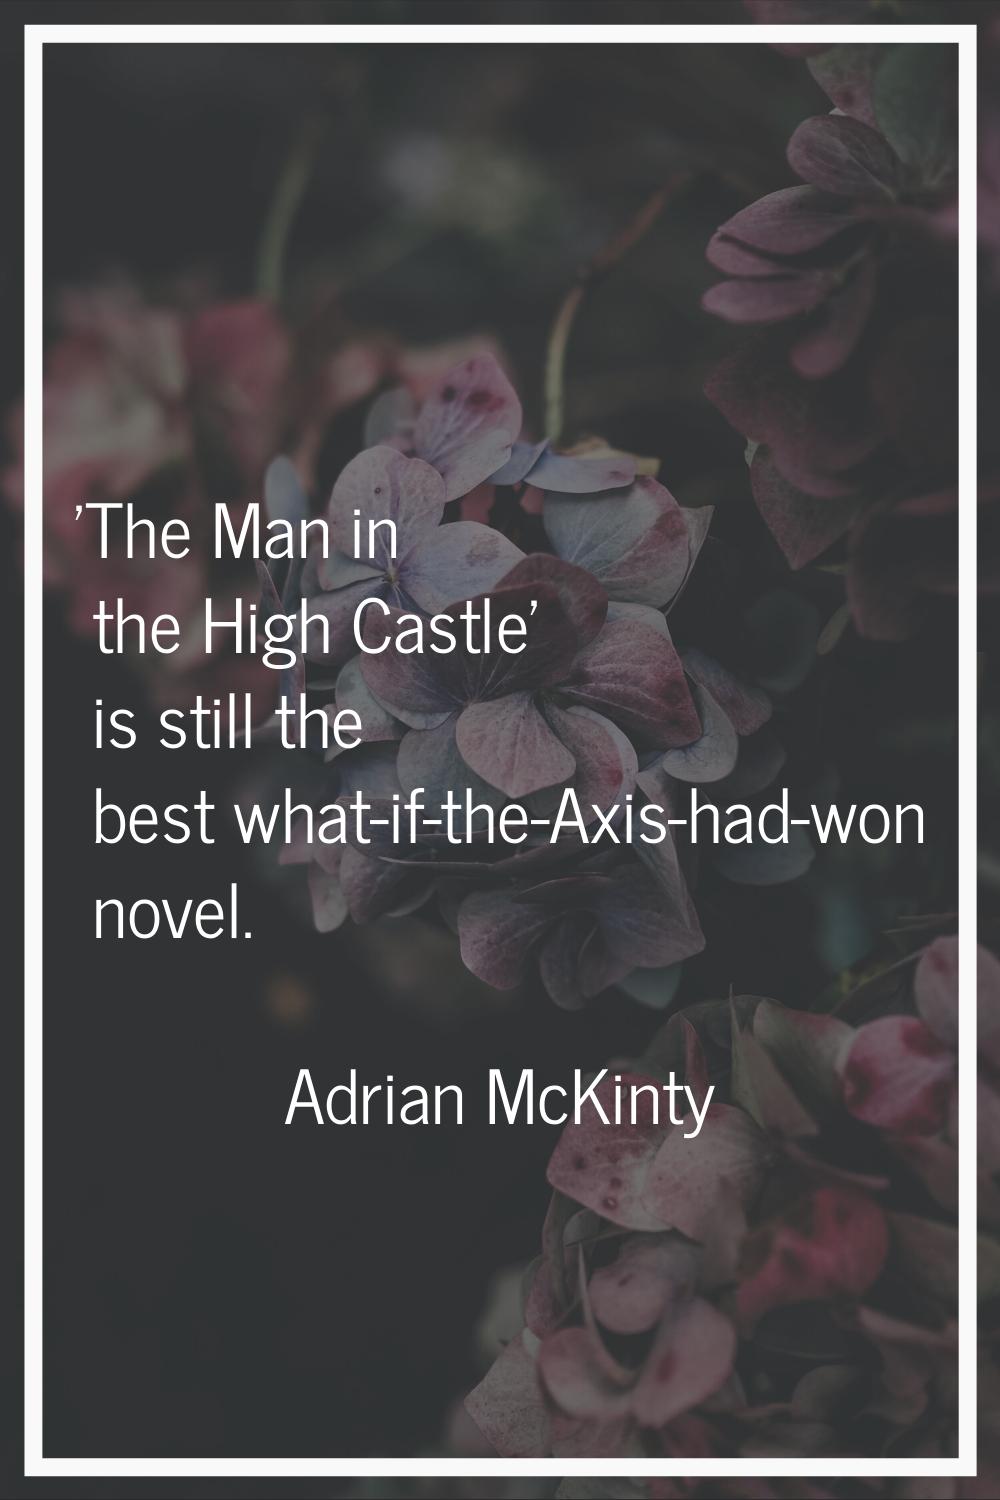 'The Man in the High Castle' is still the best what-if-the-Axis-had-won novel.